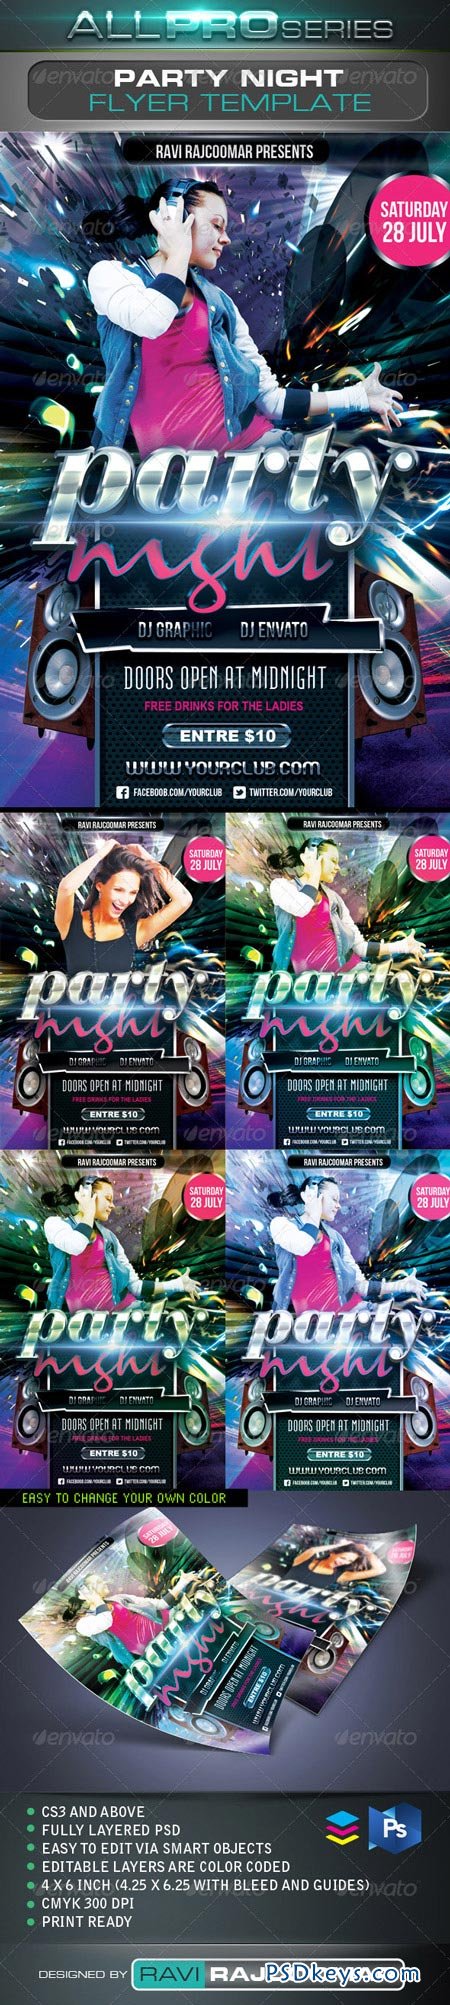 Party Night Flyer Template 2650826